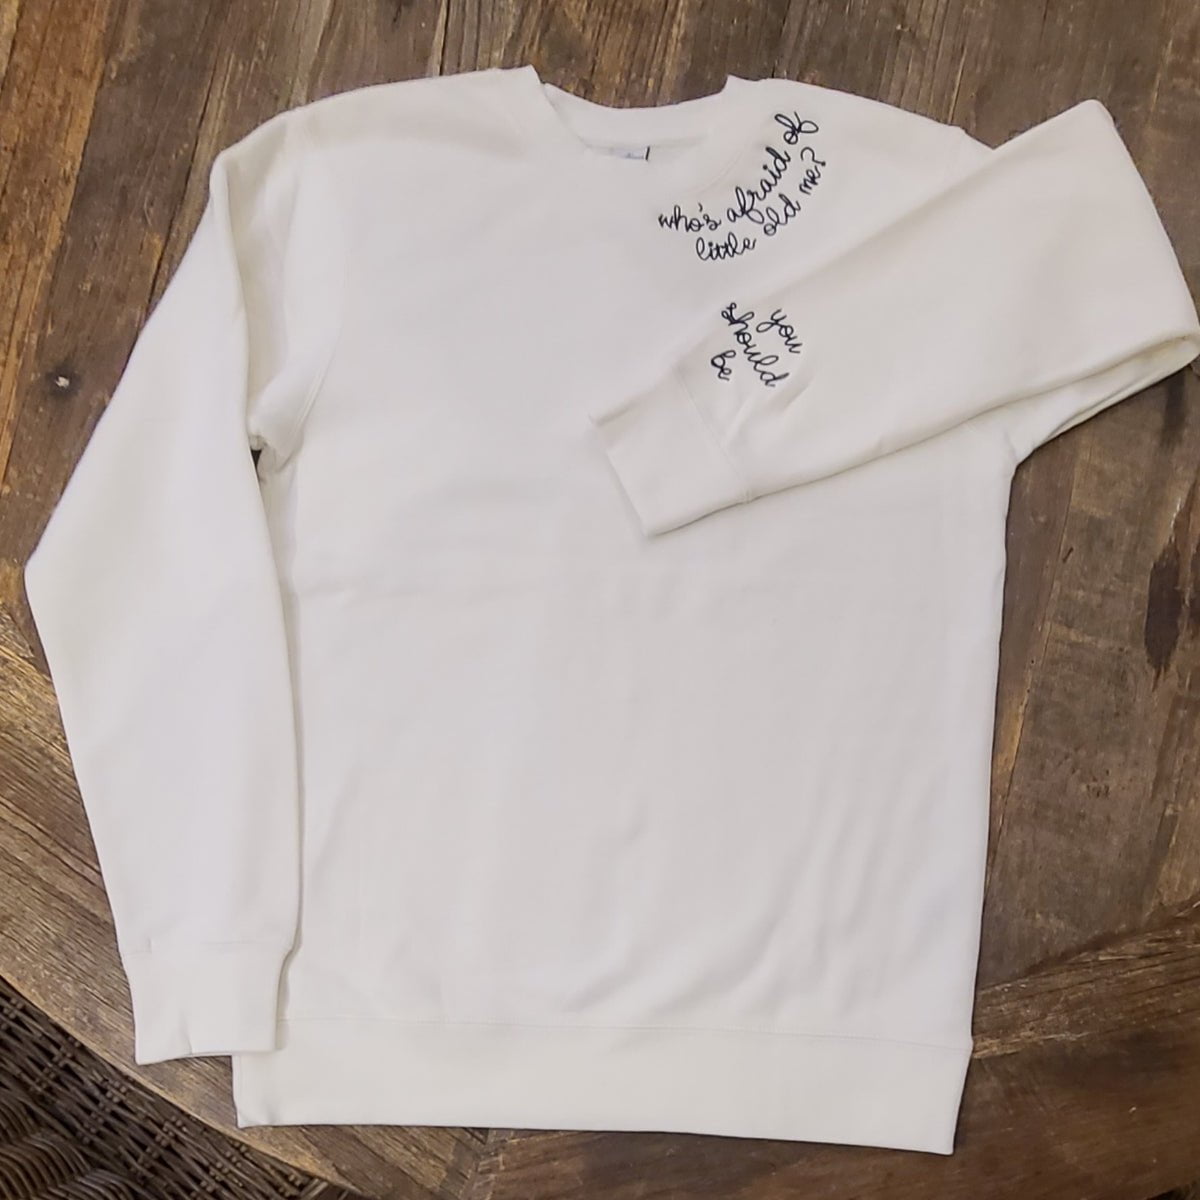 white crew neck sweatshirt embroidered with "who's afraid of little old me? You should be."